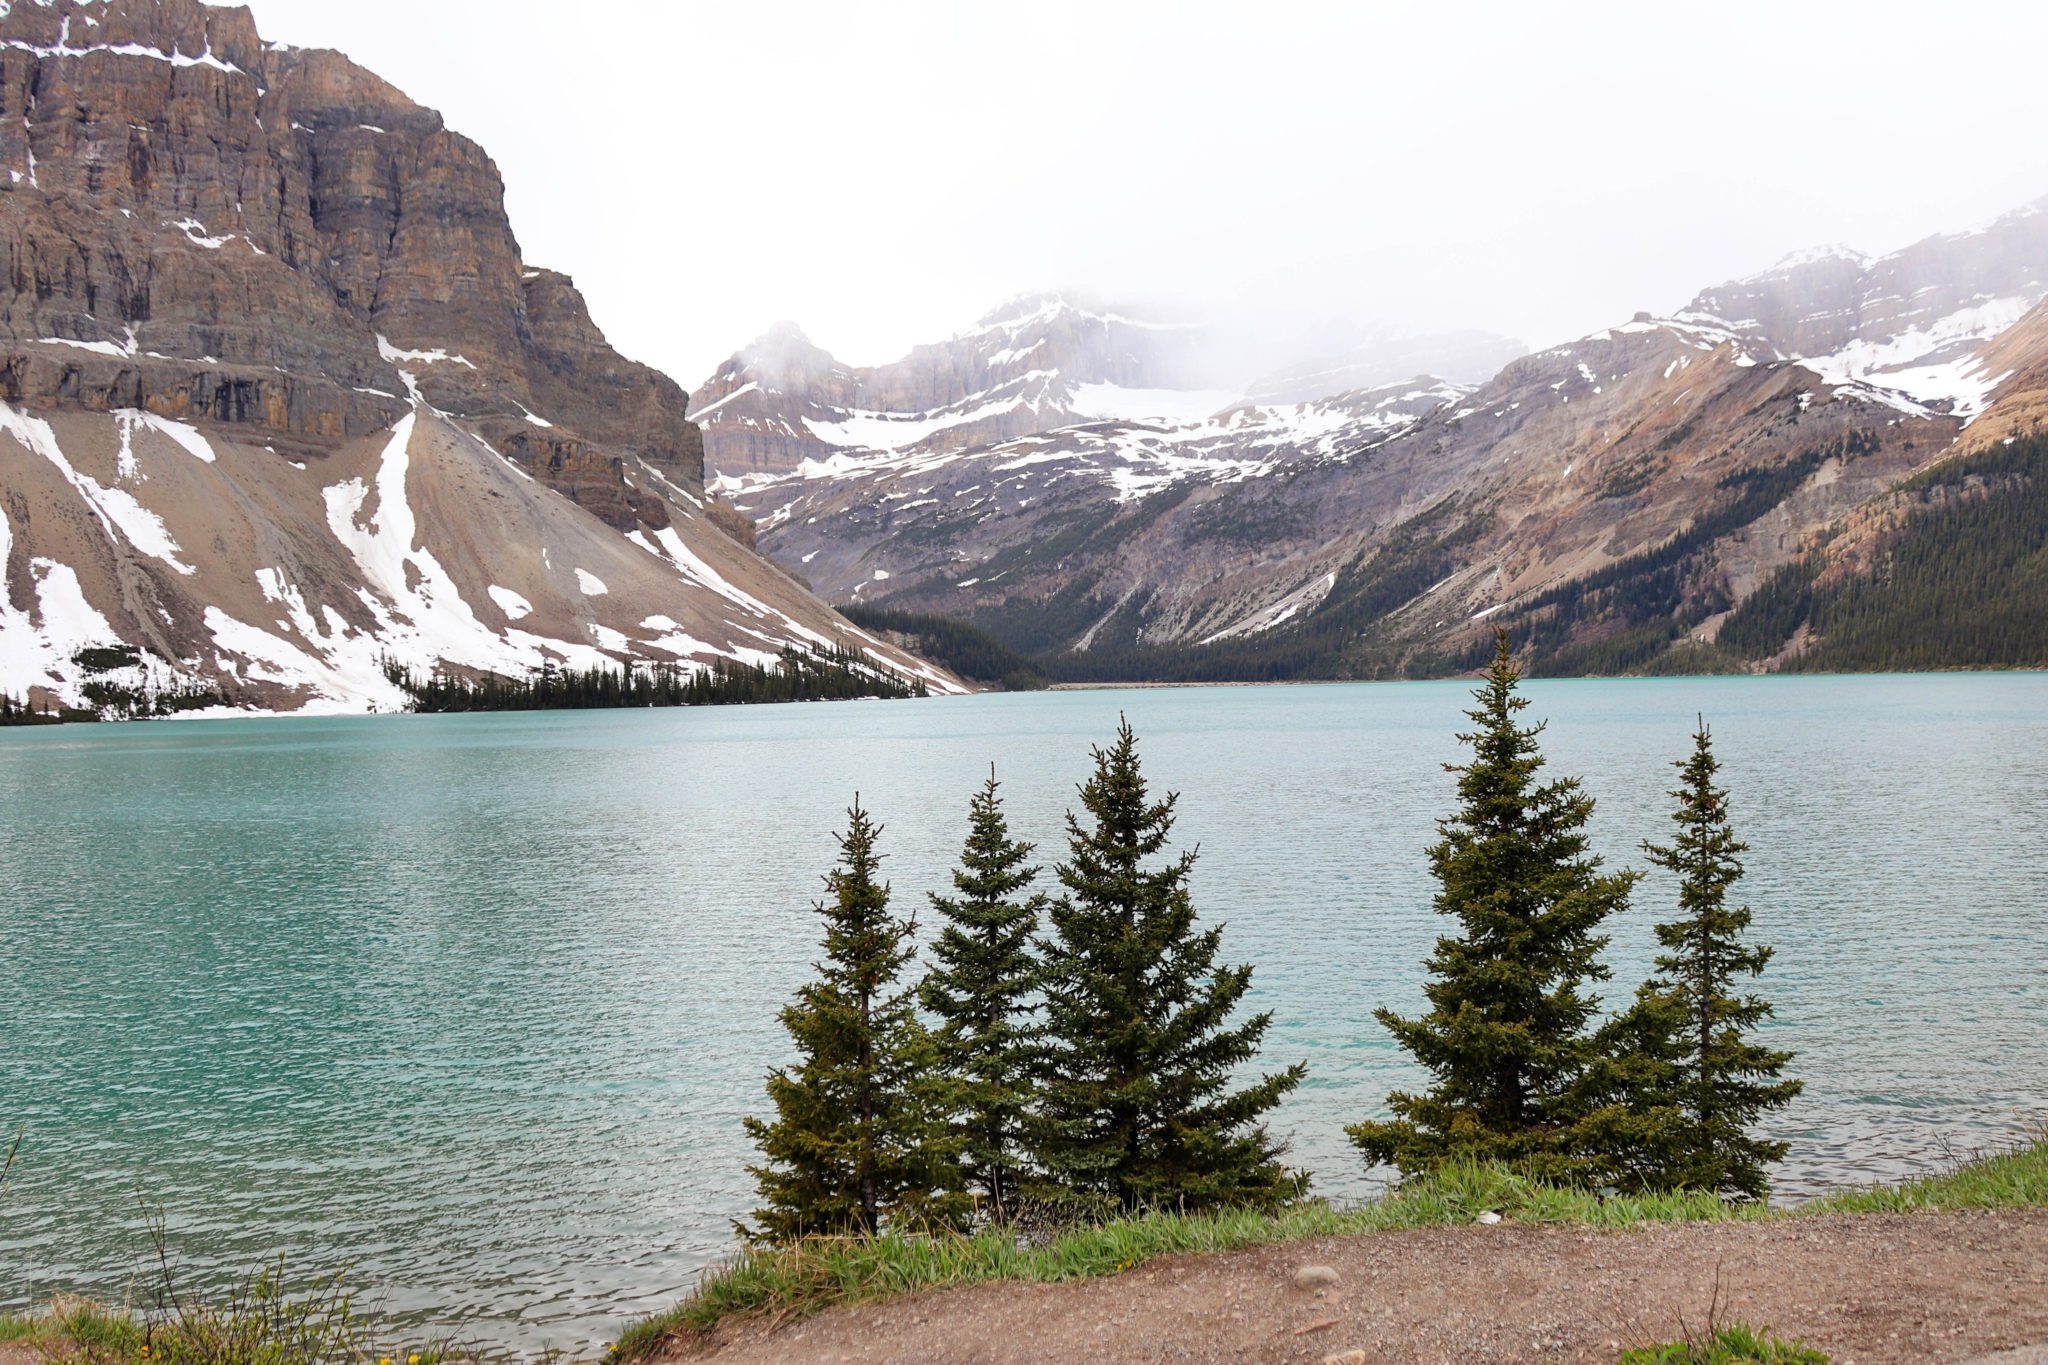 Banff Photography Guide: 15 Amazing Spots to take Photos in Banff | Columbia Ice Fields Parkway Bow Lake #banff #canada #simplywander #columbiaicefieldsparkway #bowlake